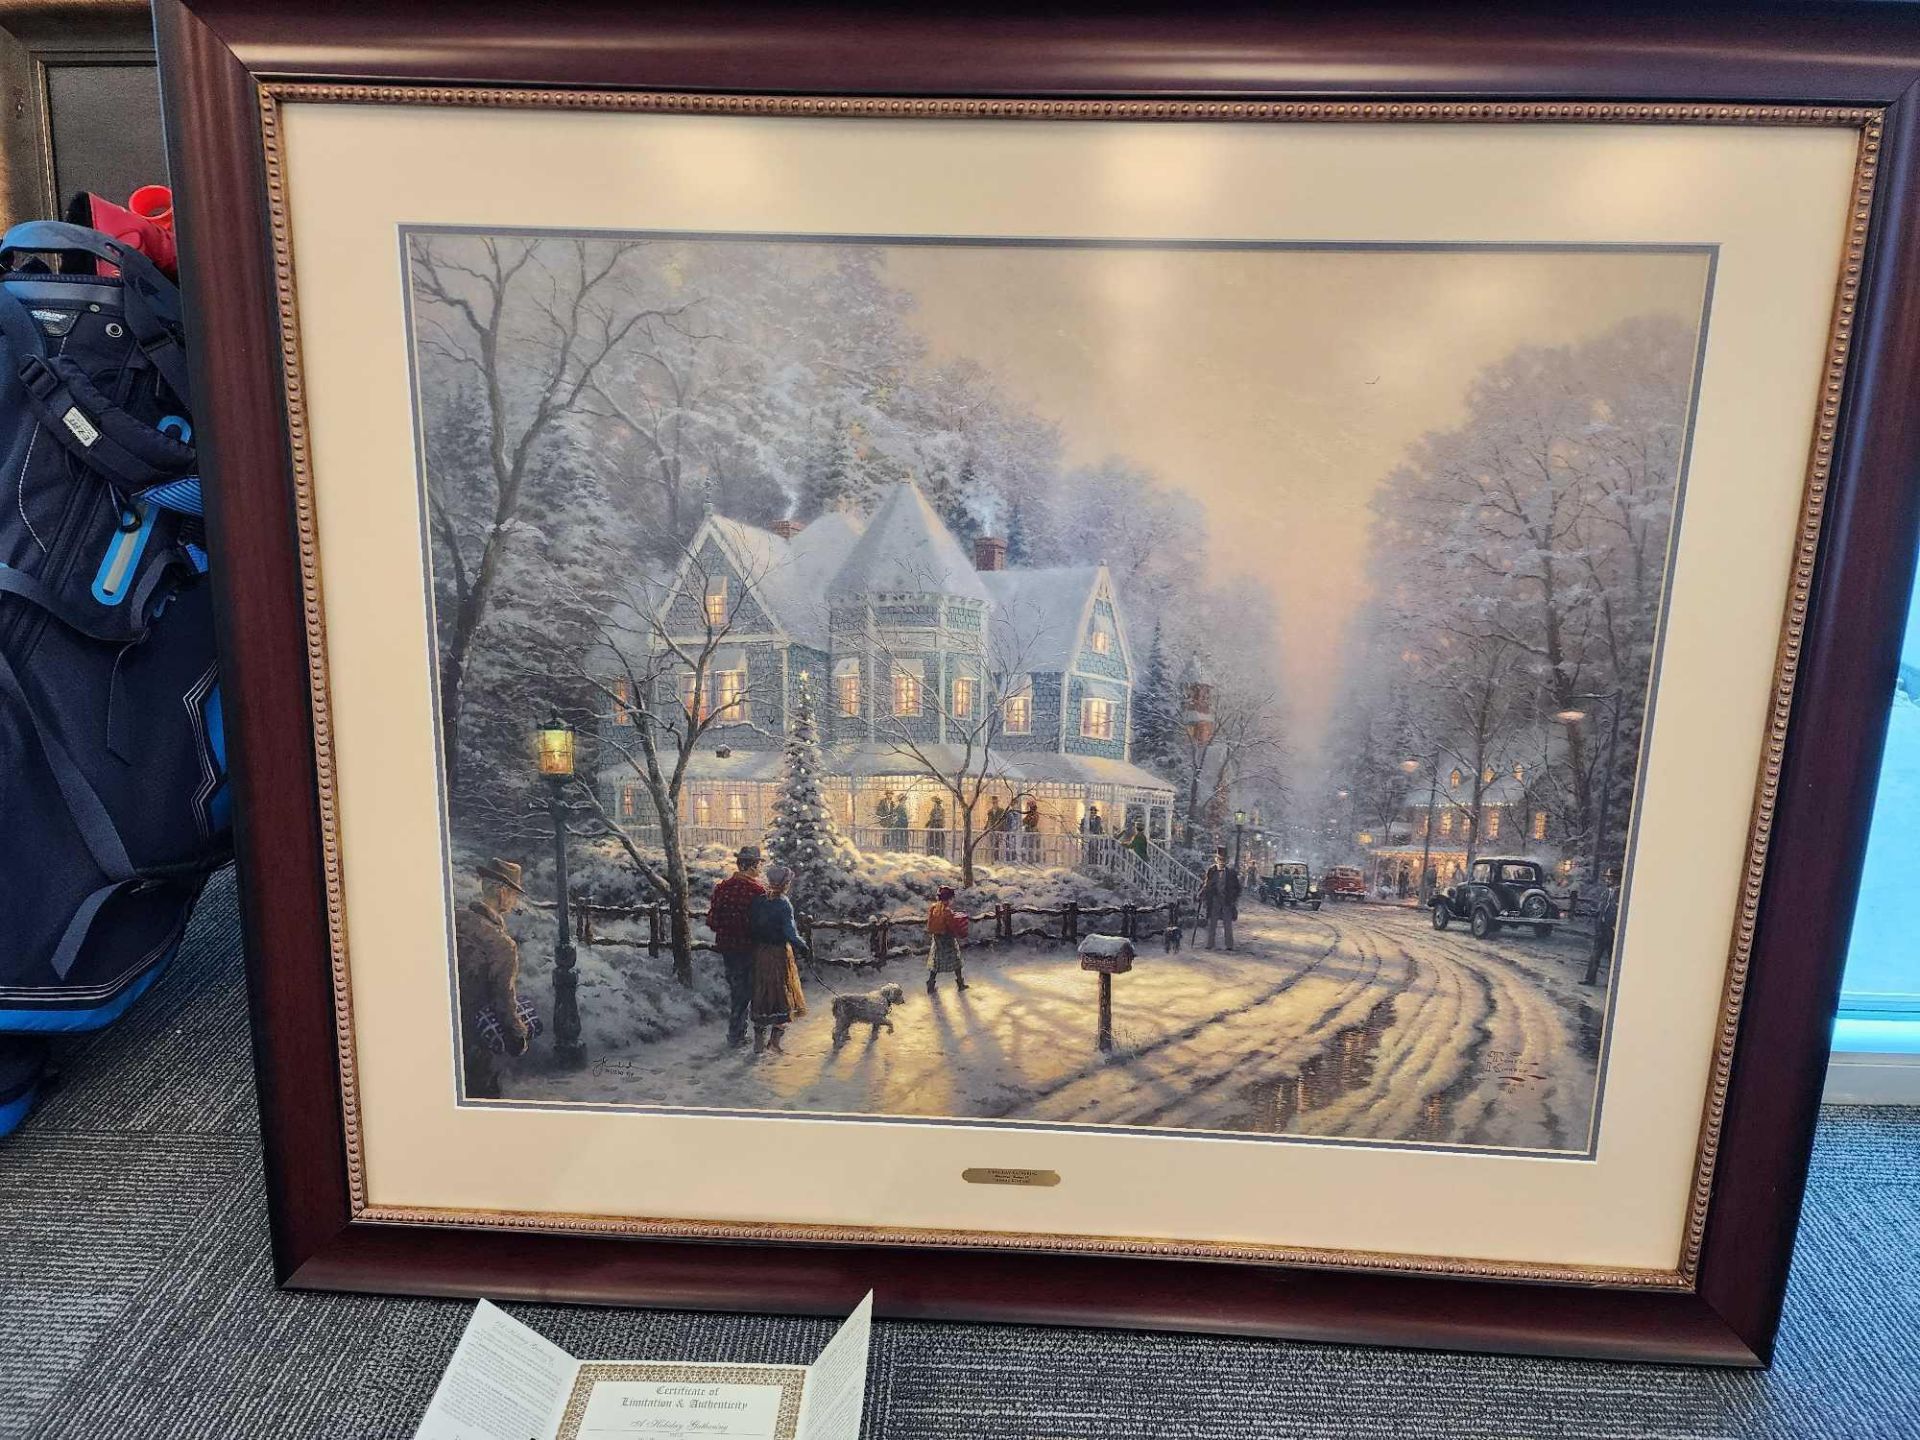 A Holiday Gathering by Thomas Kinkade 25x34. with frame and certificate - Image 2 of 6